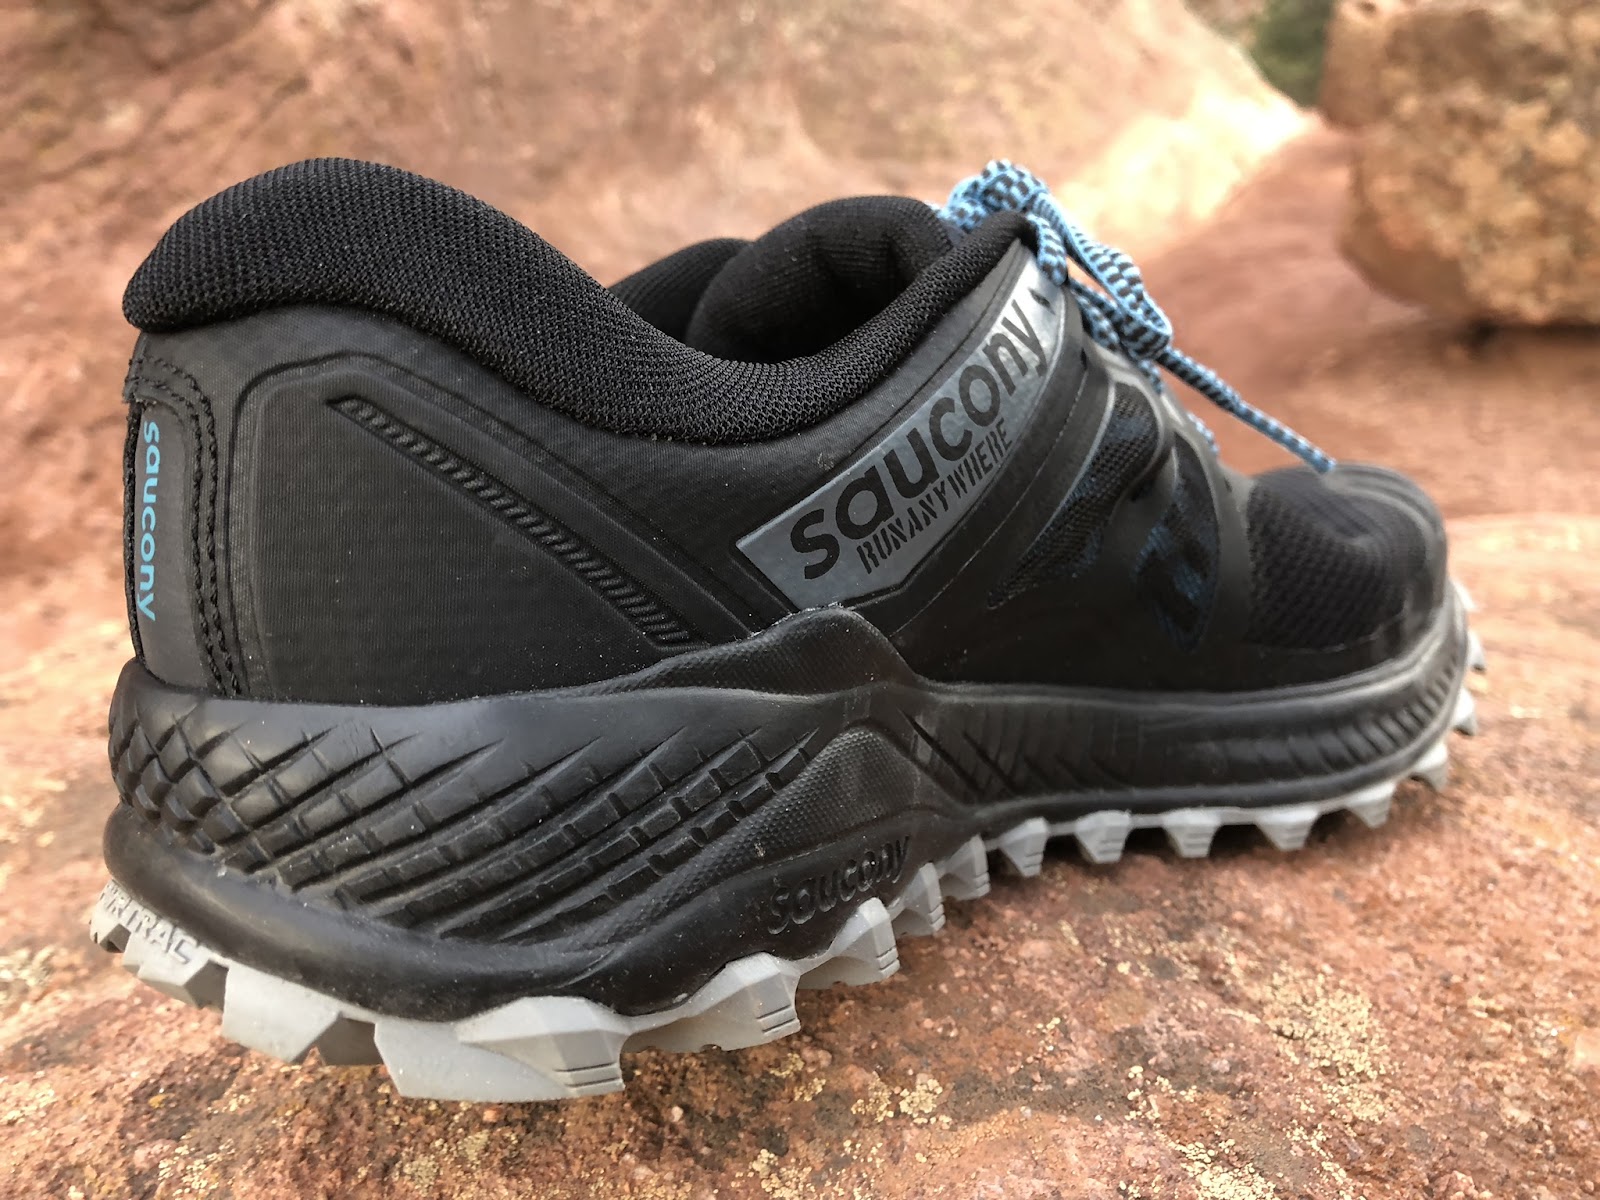 Road Trail Run: Saucony Peregrine ISO Review: Regardless of Terrain-  Confidence Inspiring, Secure & Comfortable